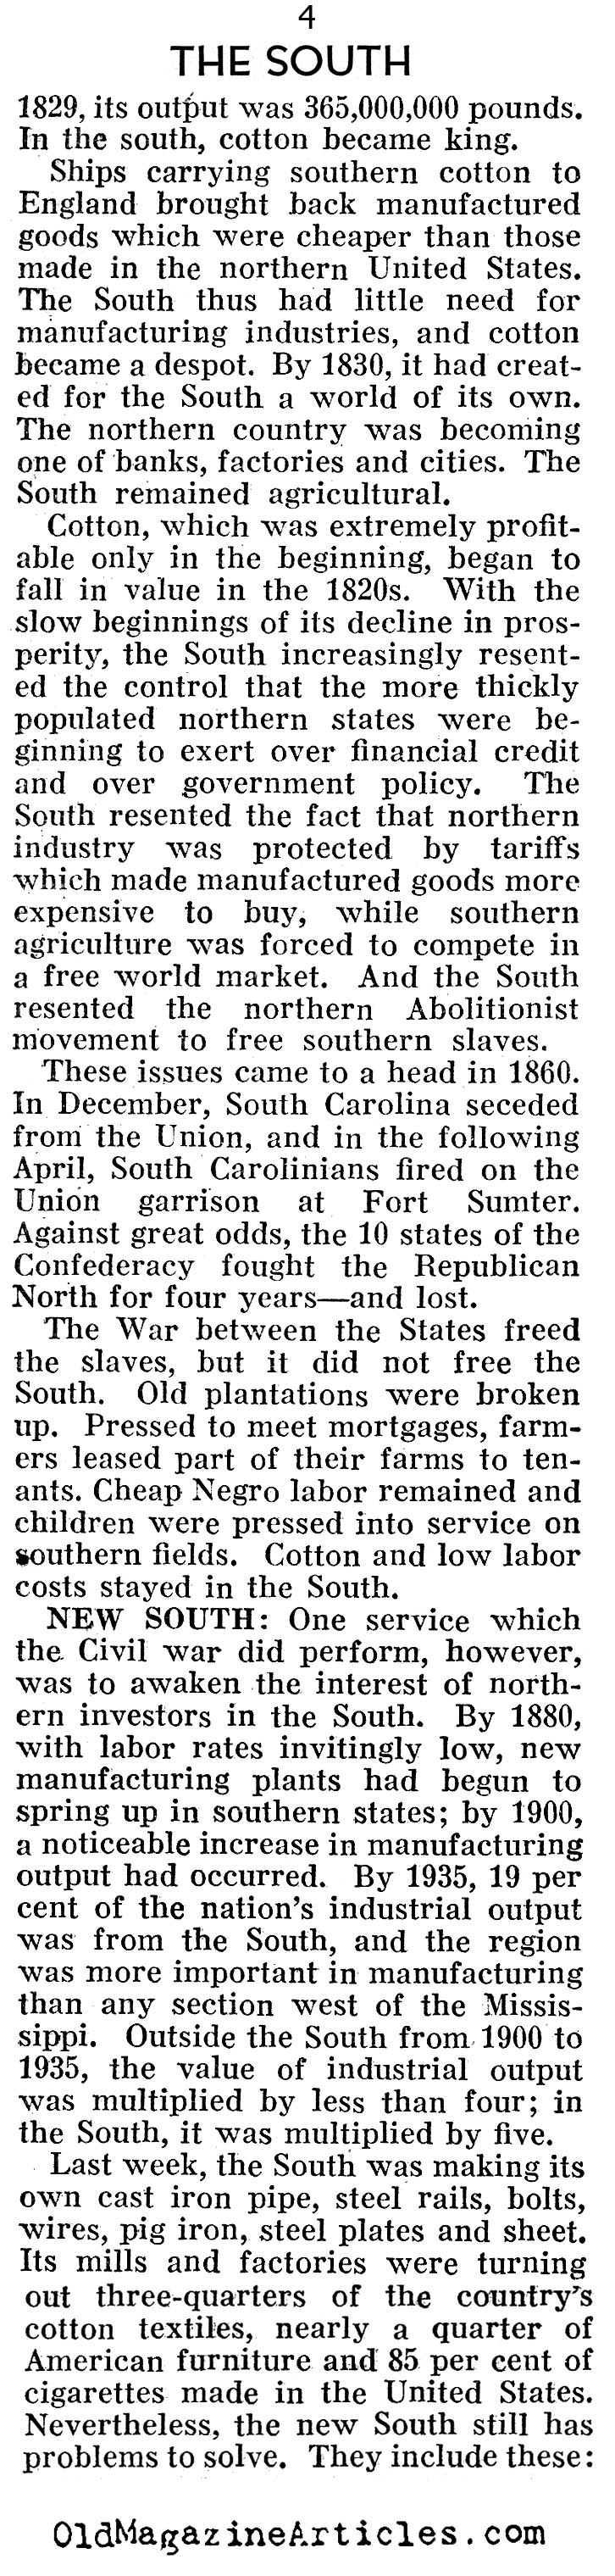 The Great Depression in the South (Pathfinder Magazine, 1938)